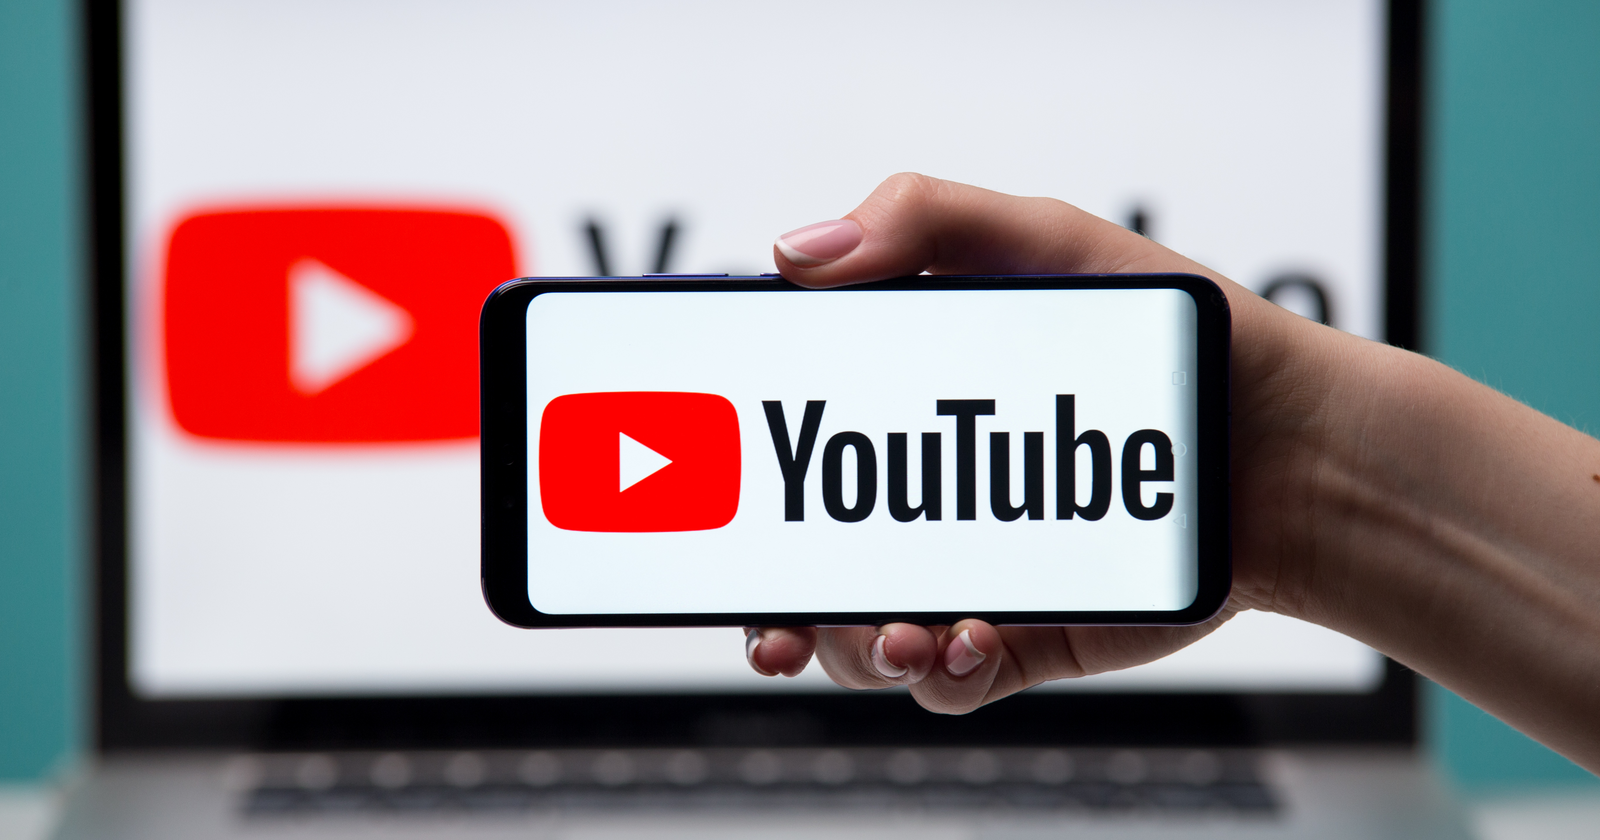 11 important tips to increase the number of views of your videos on YouTube